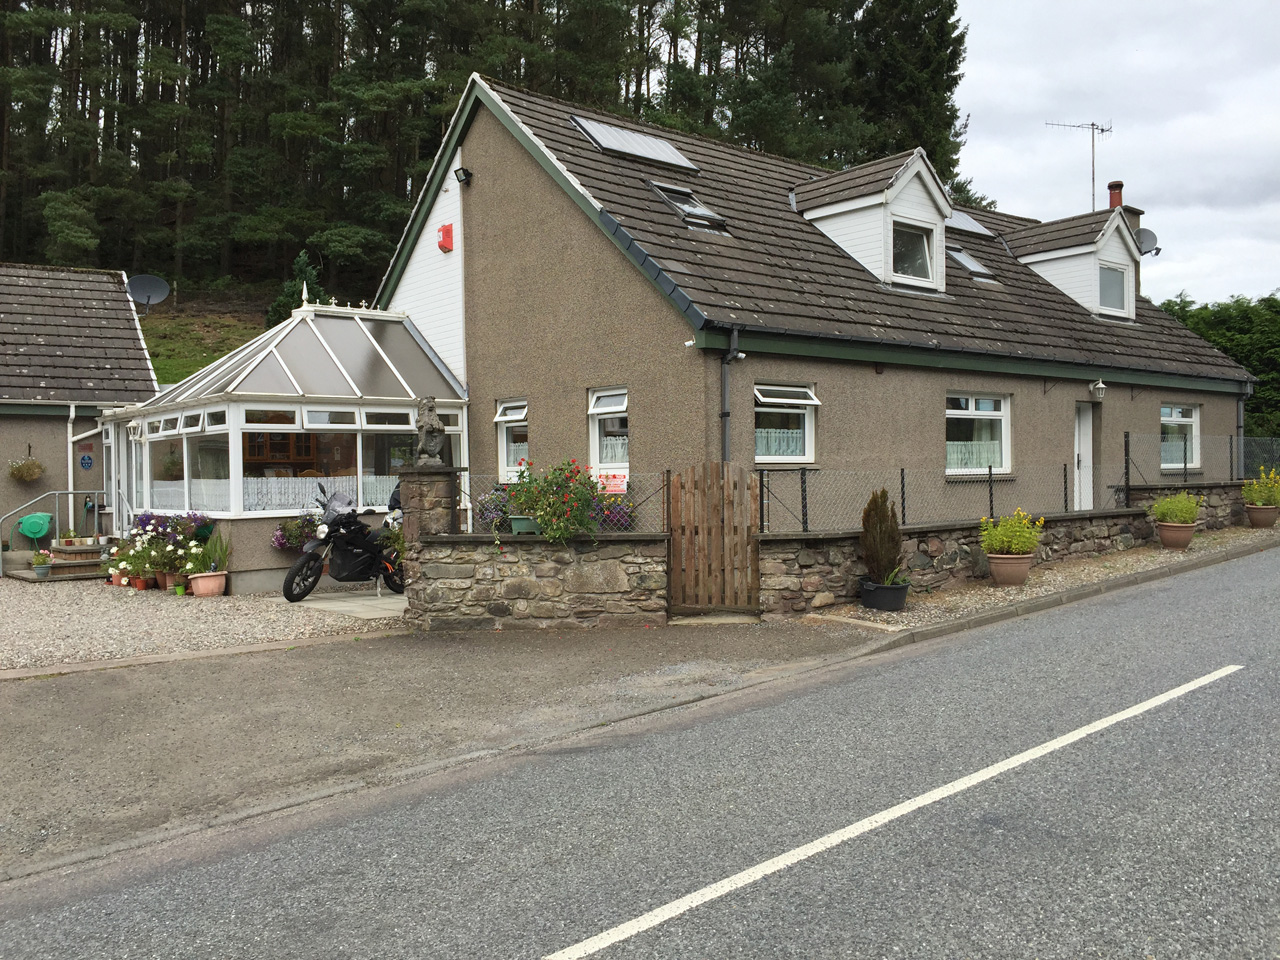 John Chivers' Zero DSR electric motorcycle charging at Fendoch Guest House, Crieff.